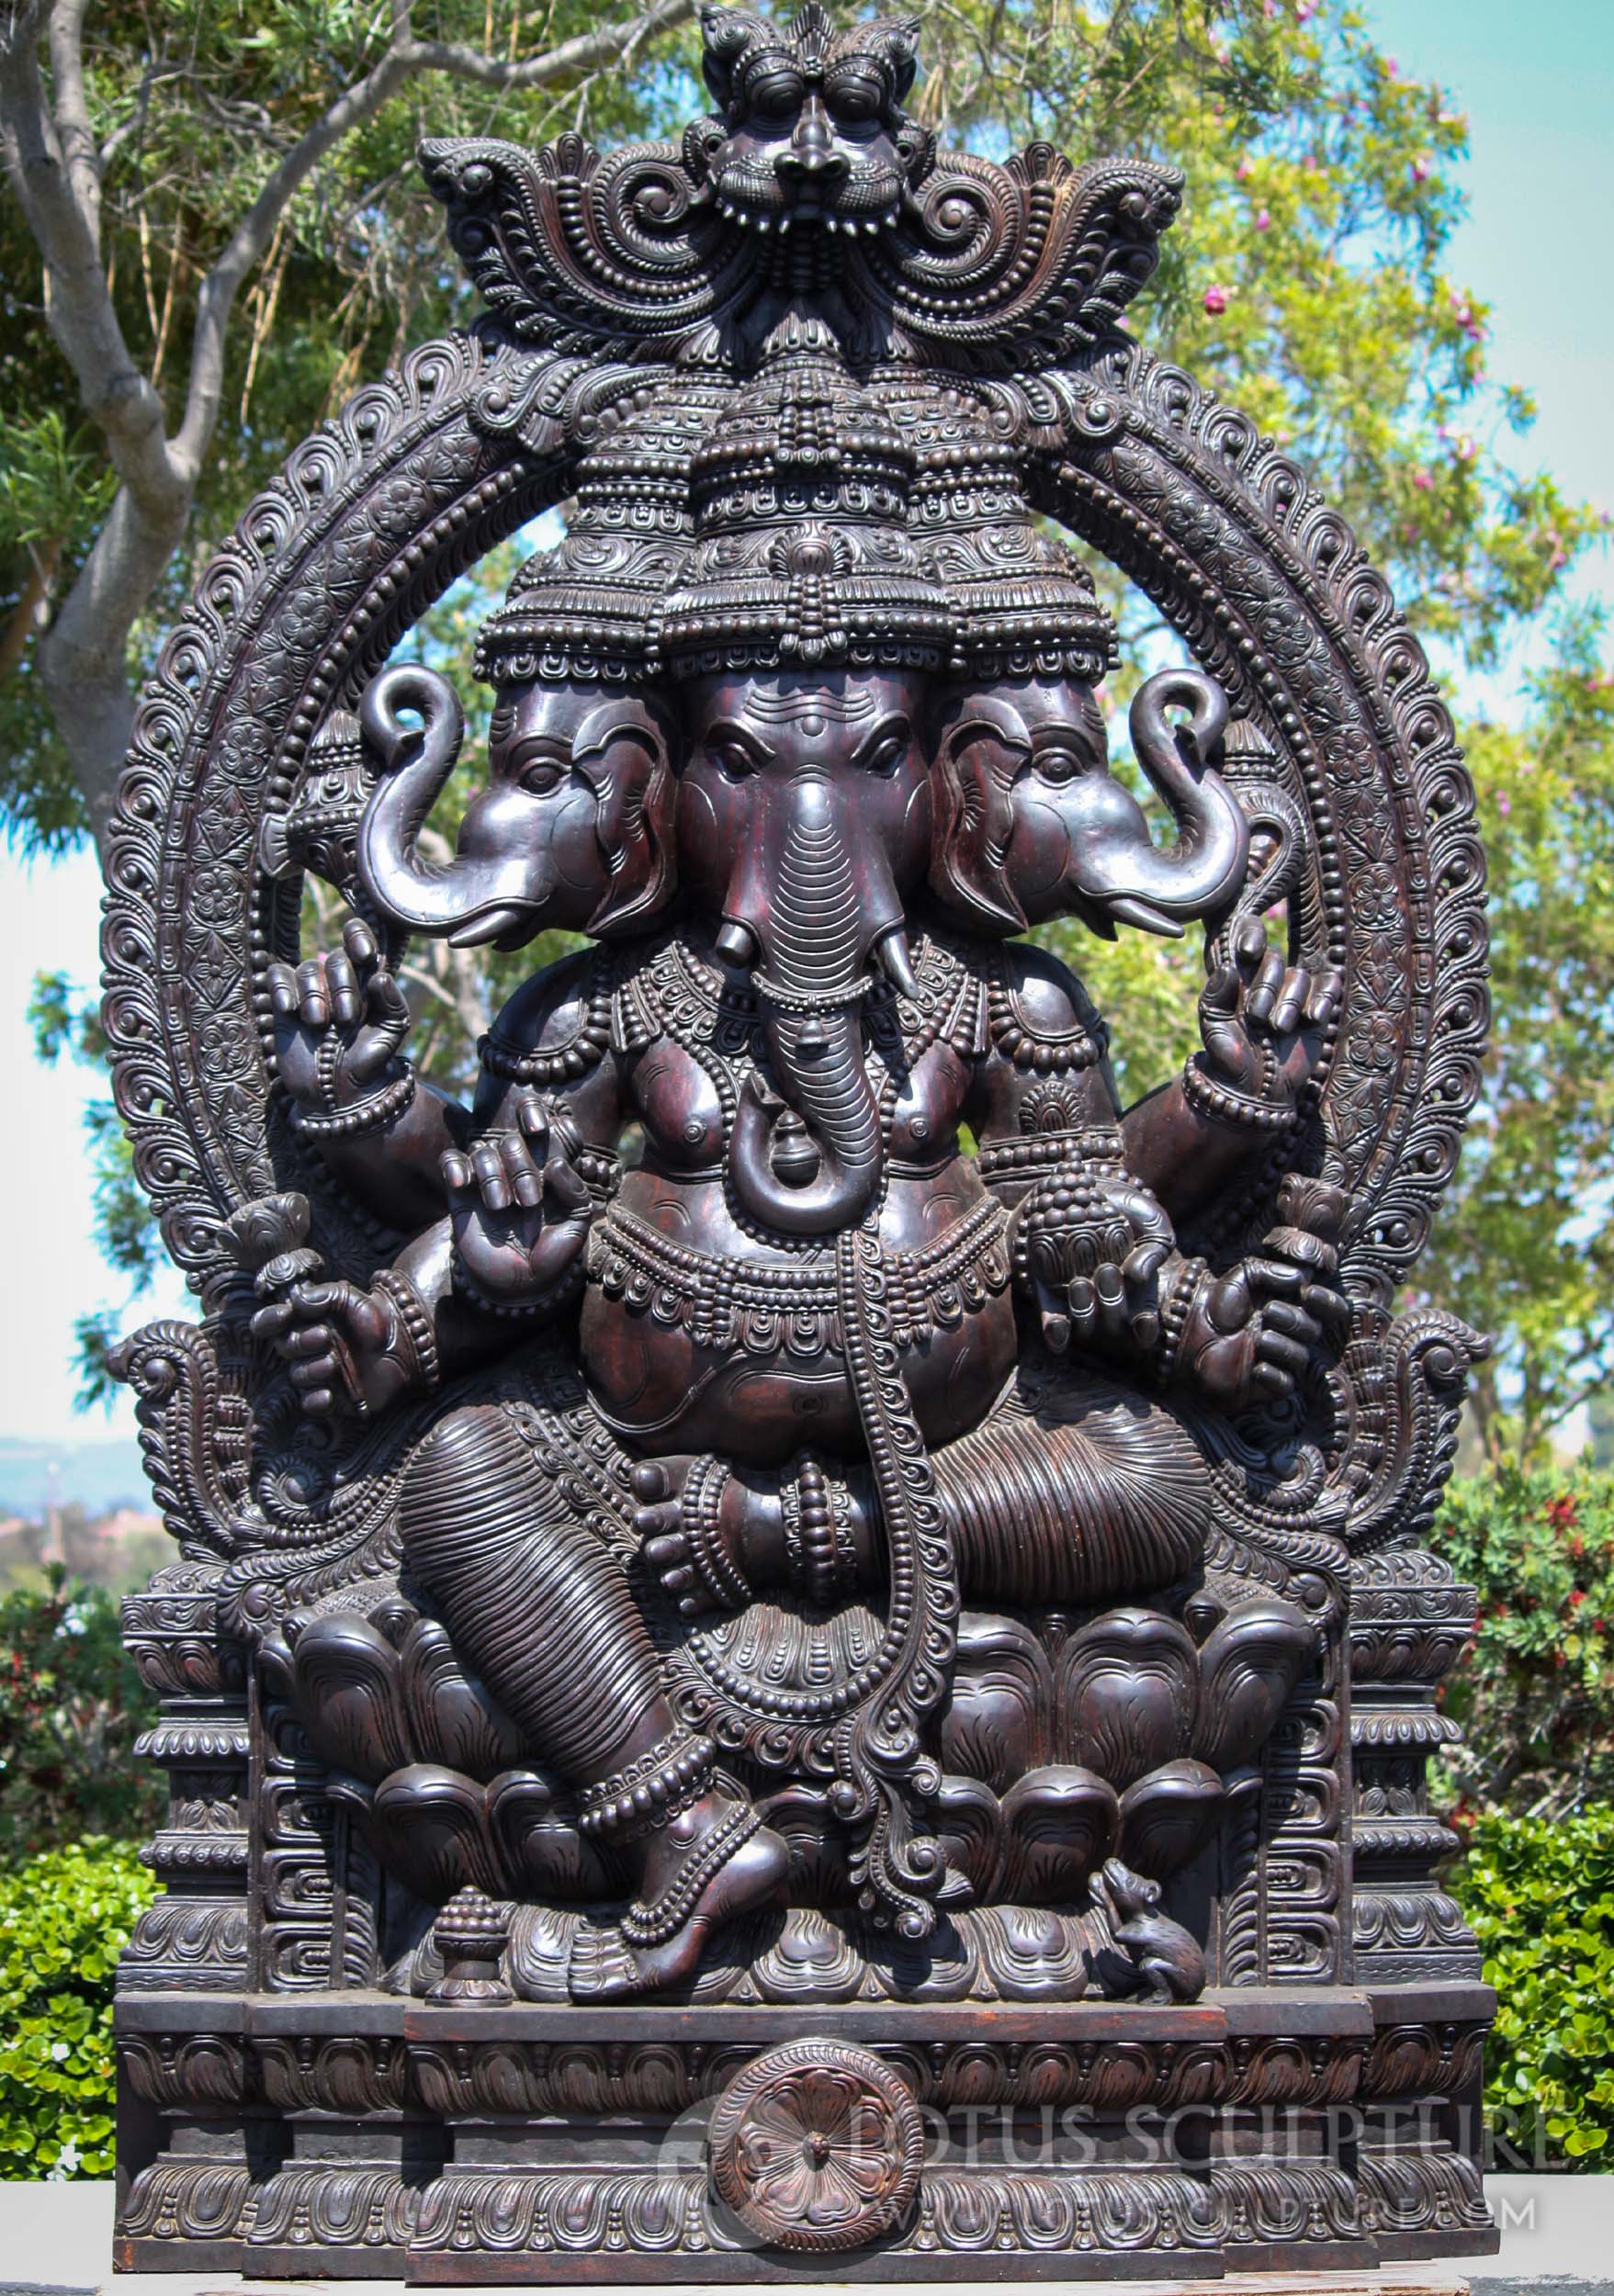 Tall Hand Carved Wood 3 Headed, Trimuhka Ganesh Statue, 6 Arms ...